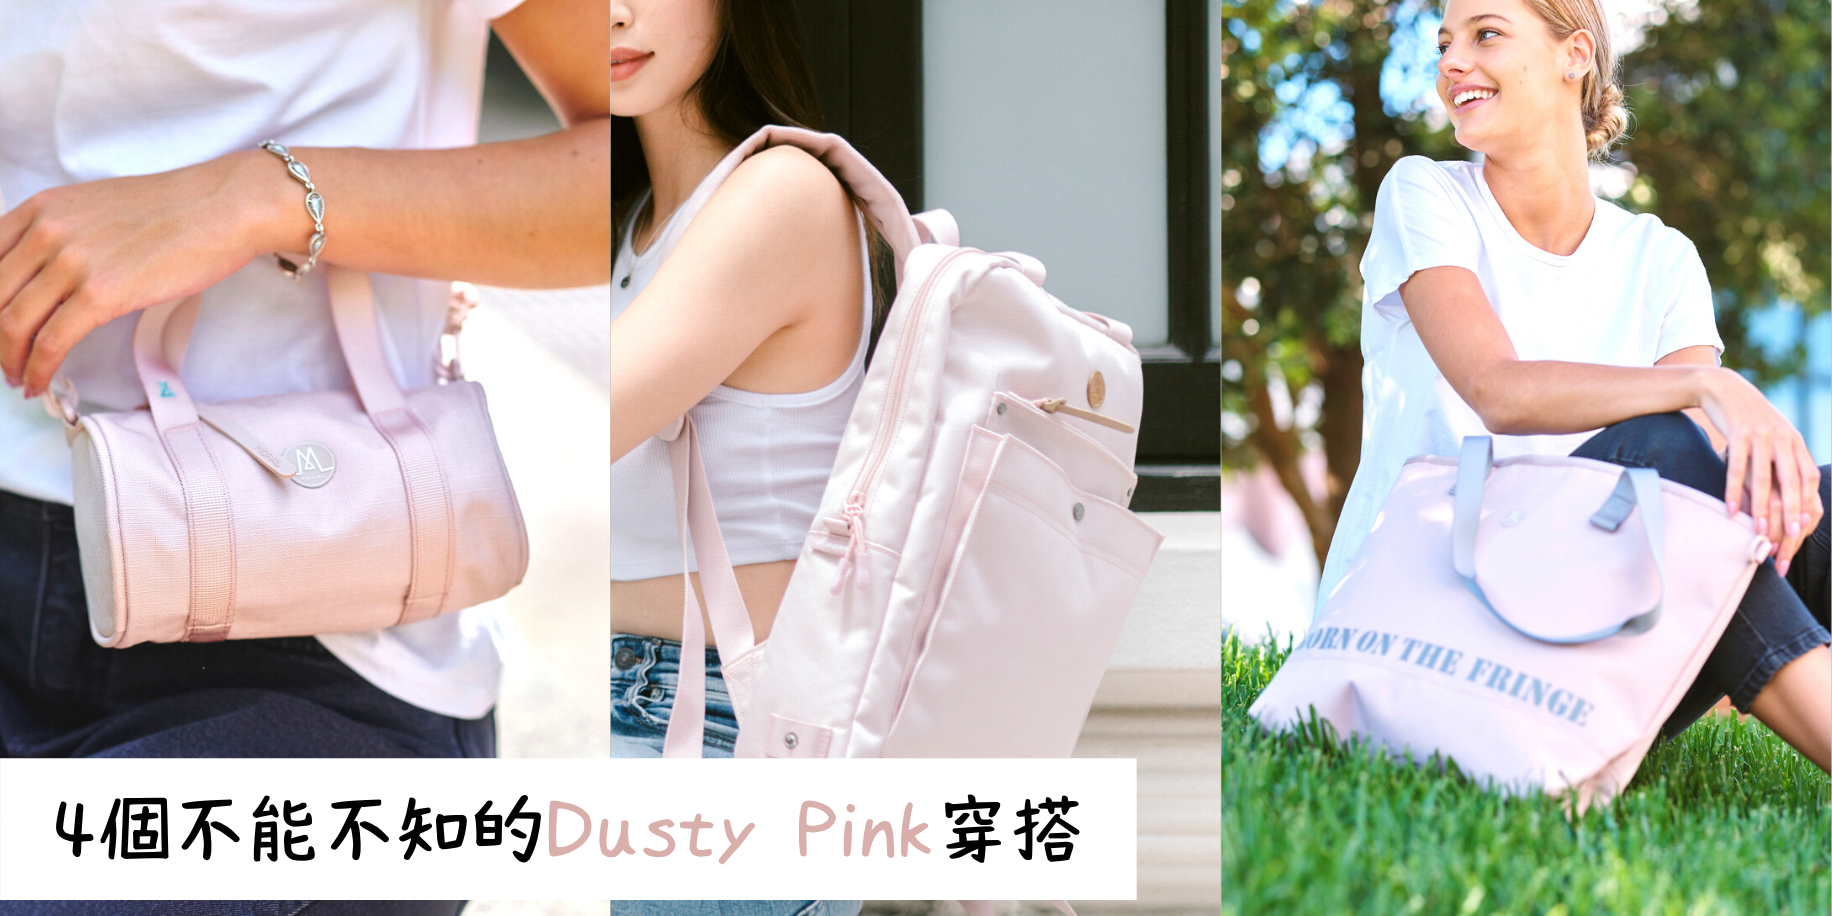 【4 Dusty Pink Outfit Ideas that You Don’t Want to Miss】